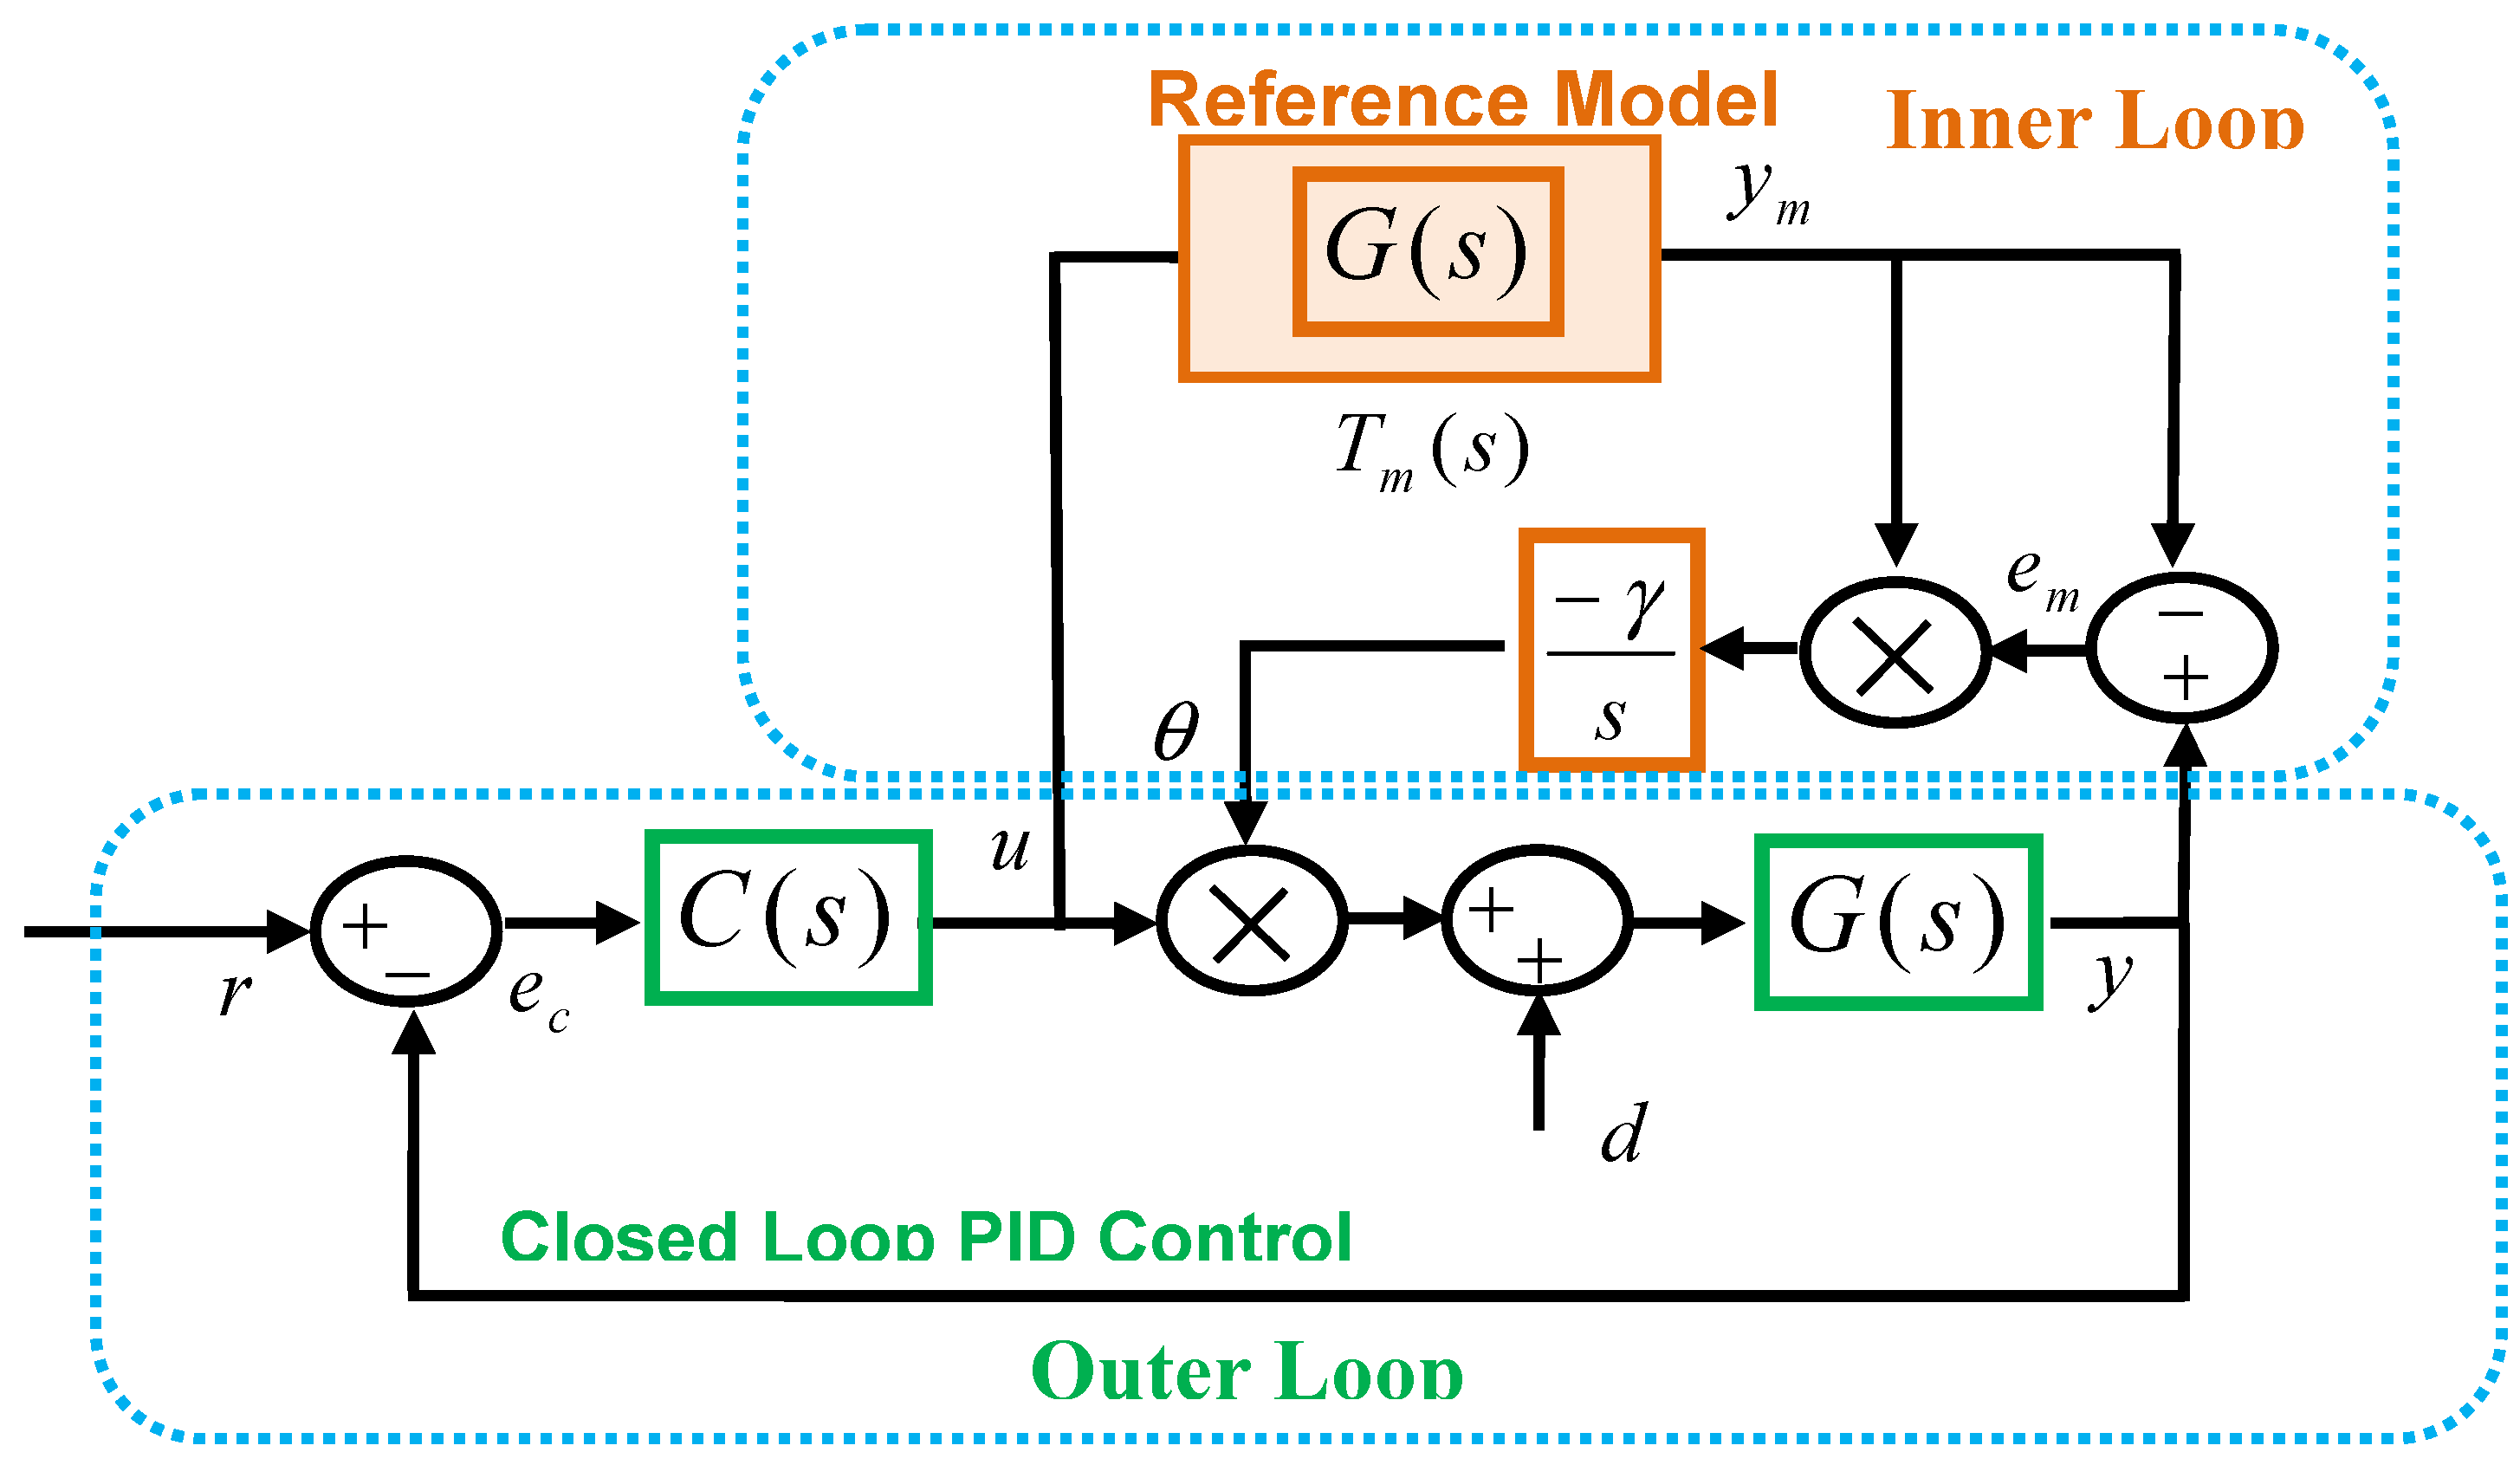 the linear model representation of the avr control loop